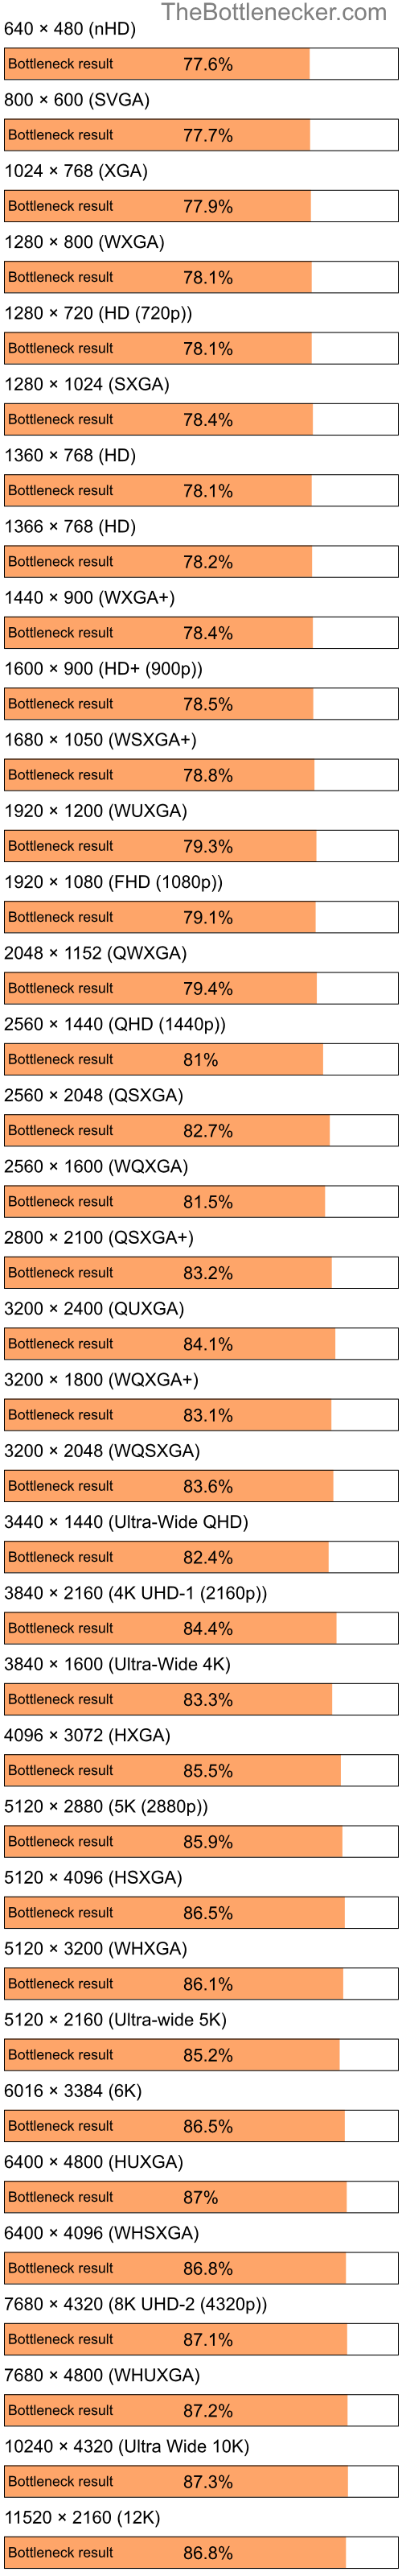 Bottleneck results by resolution for Intel Pentium 4 and AMD Mobility Radeon X2300 in Graphic Card Intense Tasks